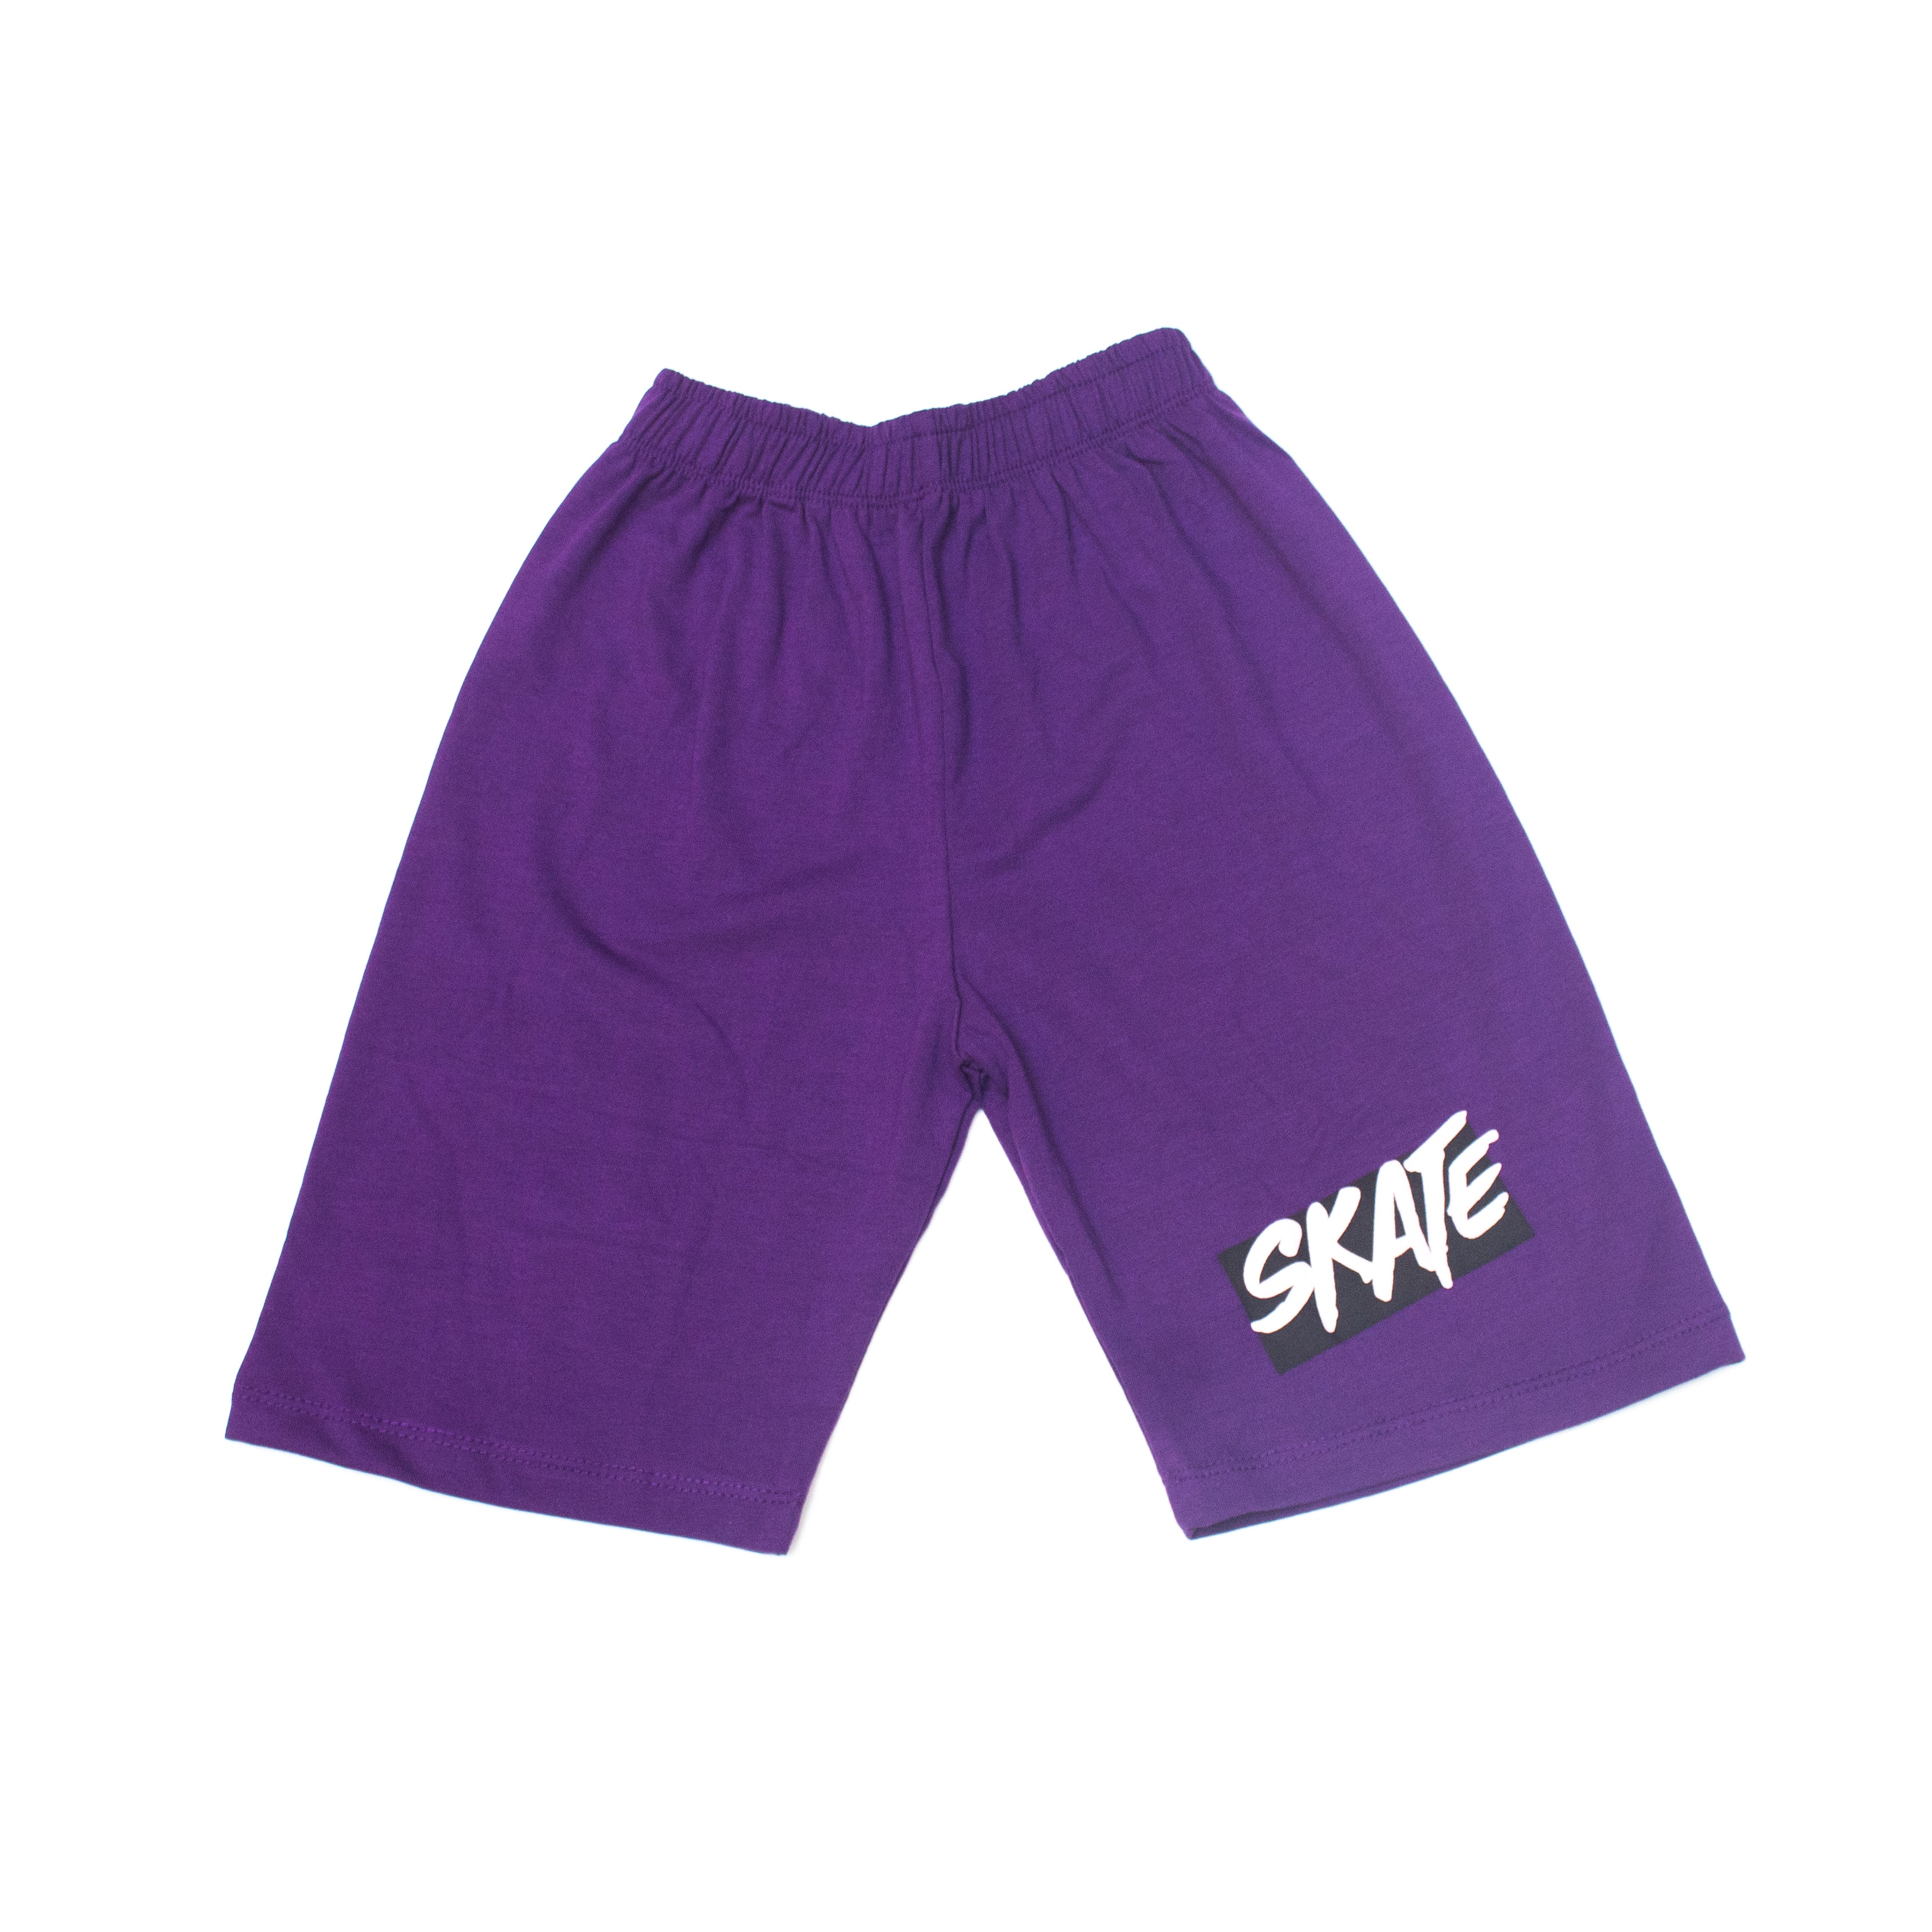 Skate Purple T-Shirt And Shorts For Kids